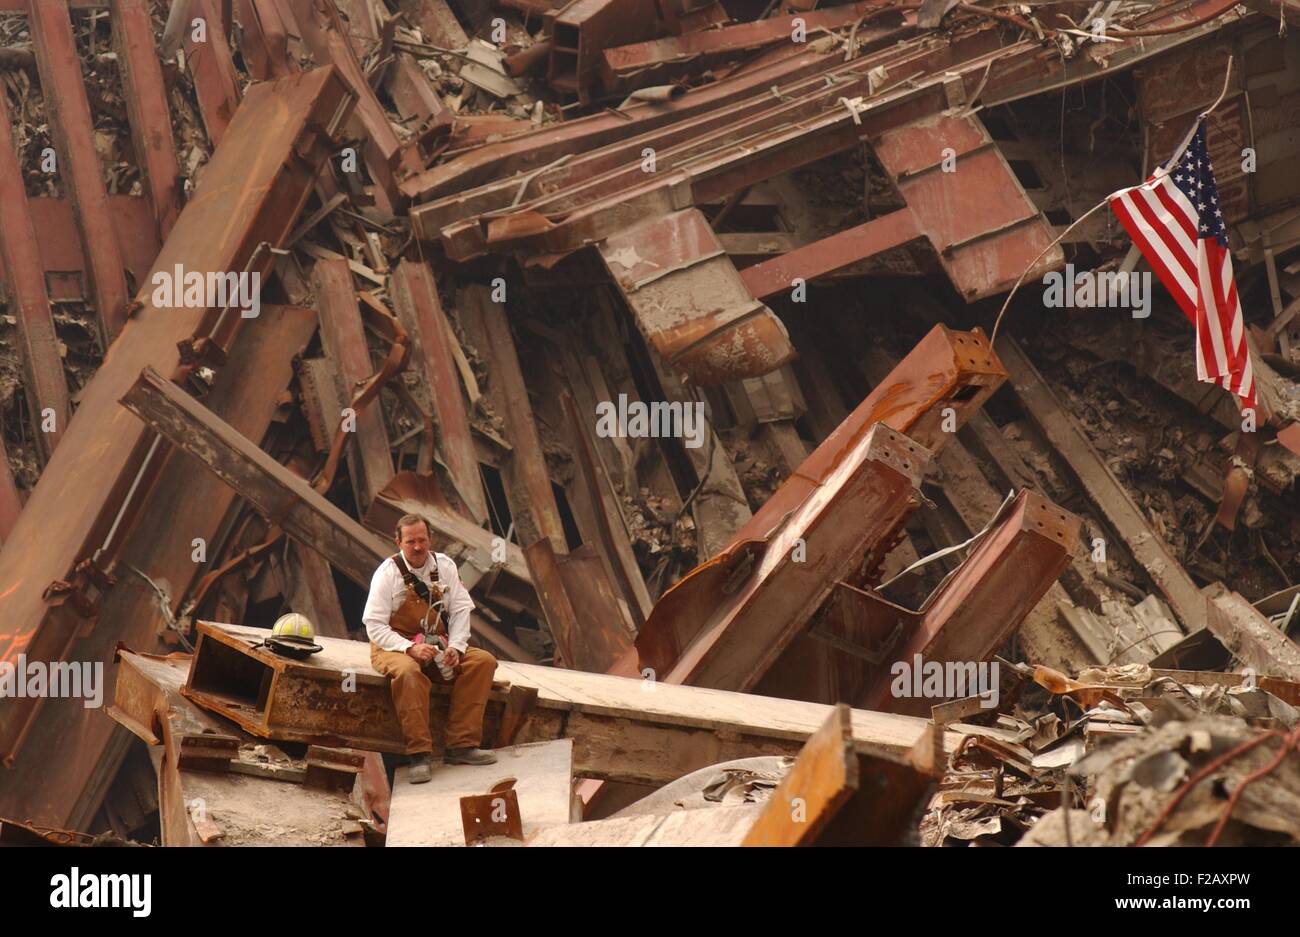 Solo firefighter sitting on a beam in the wreckage of the World Trade Center, Sept. 28, 2001. New York City, after September 11, 2001 terrorist attacks. (BSLOC 2015 2 109) Stock Photo